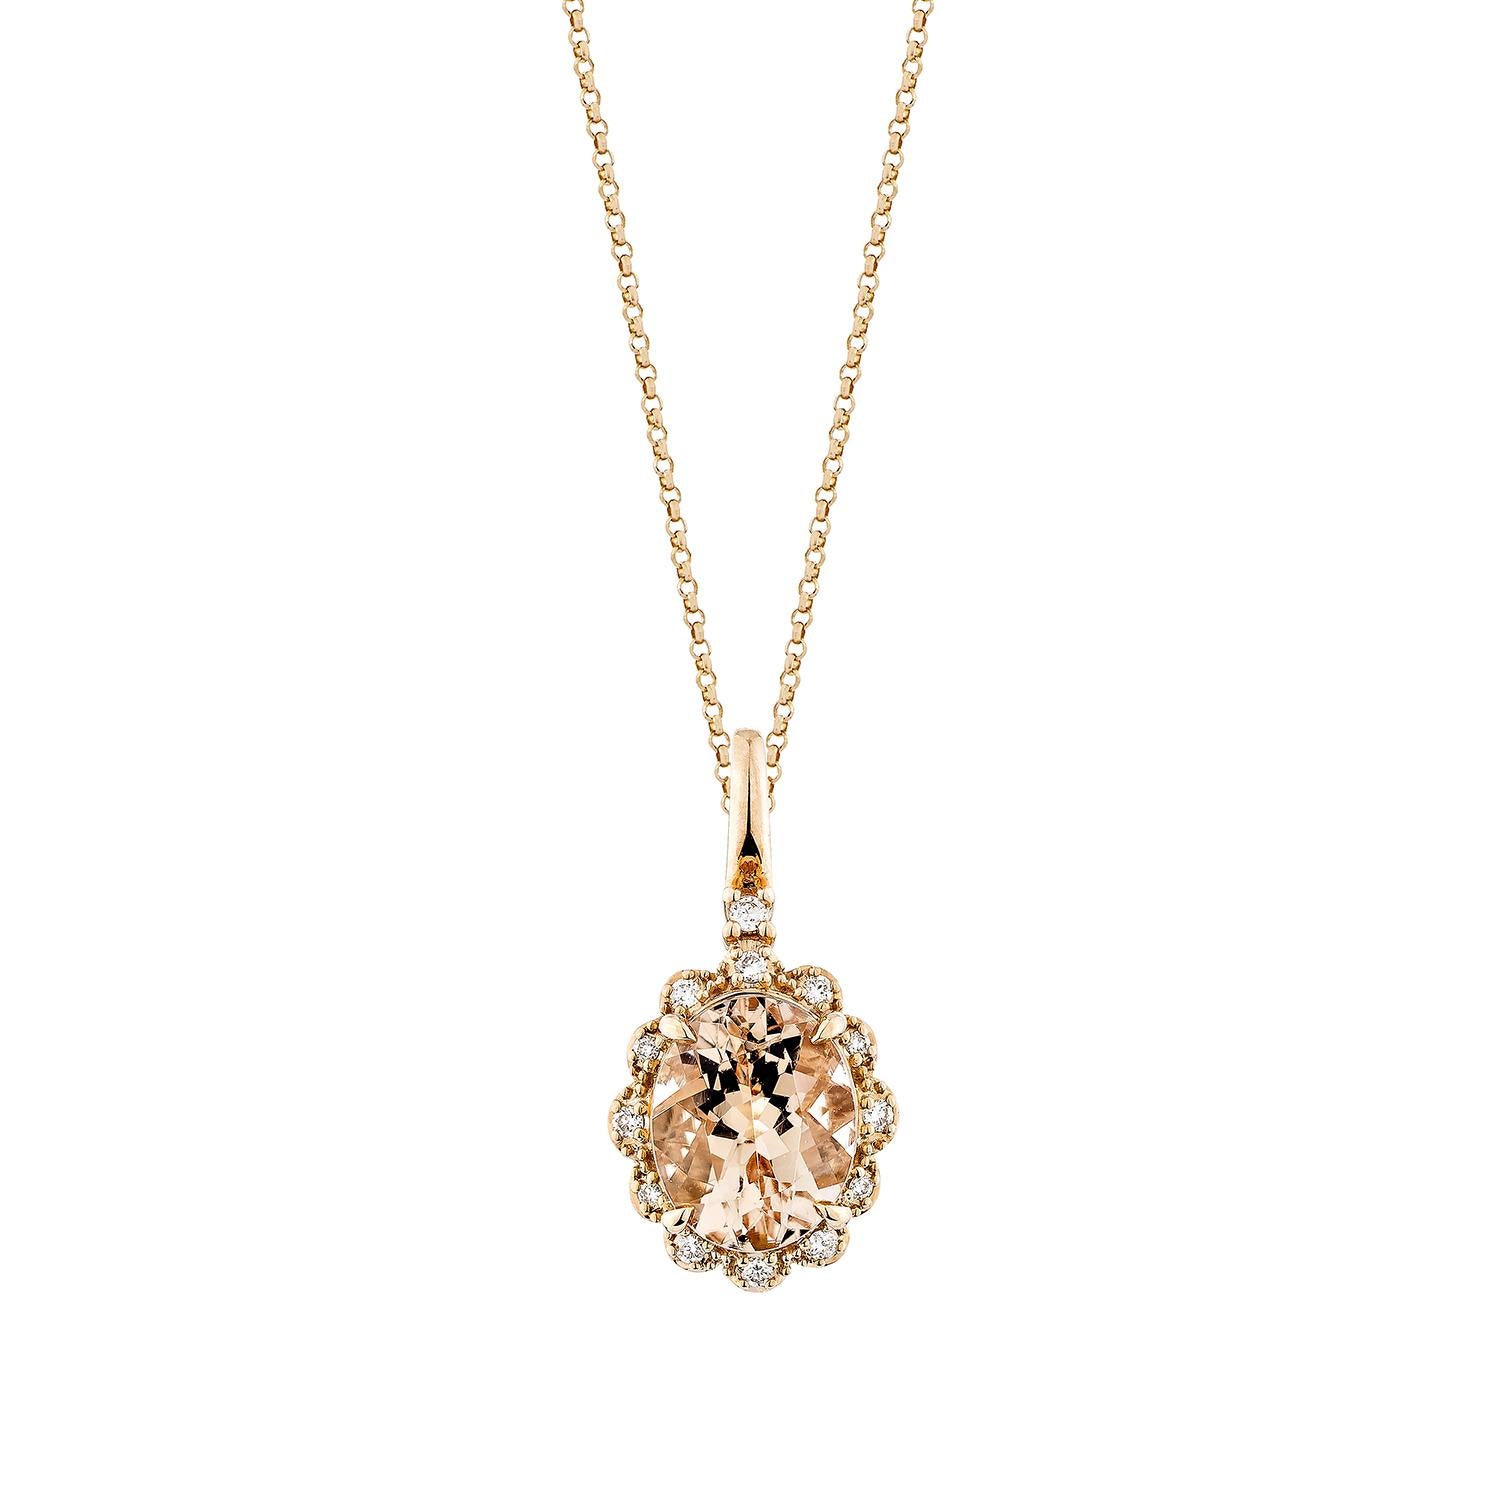 Oval Cut 2.54 Carat Morganite Pendant in 18Karat Rose Gold with White Diamond. For Sale